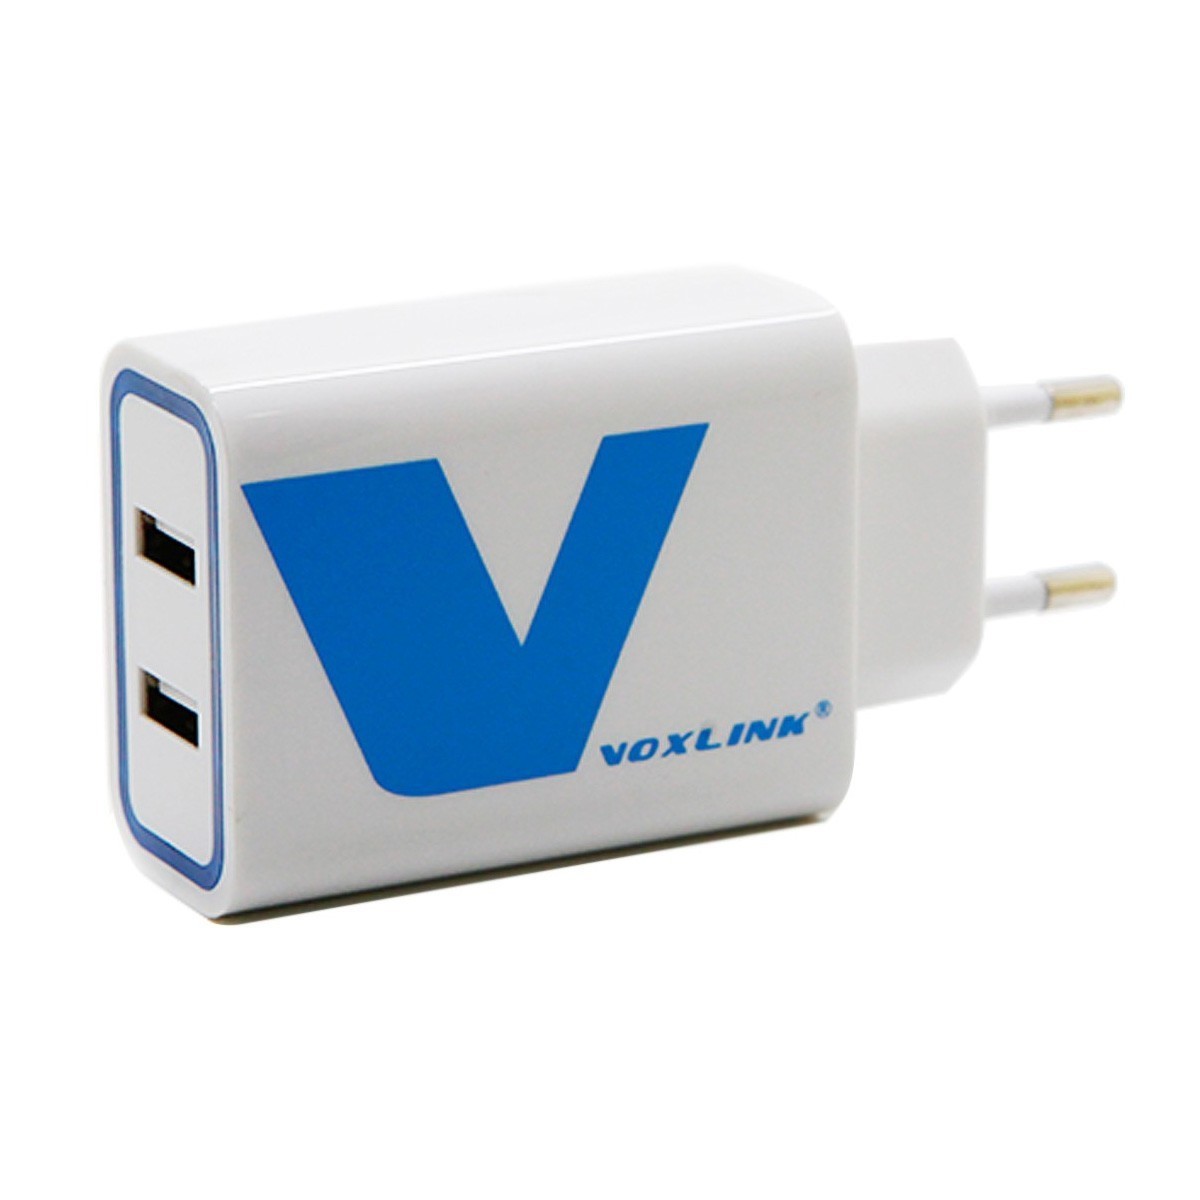 VOXLINK 12W 2-Port USB Wall Charger Home Charger Adapter, 5V-2.4A (Total) Intelligent Charging while EU